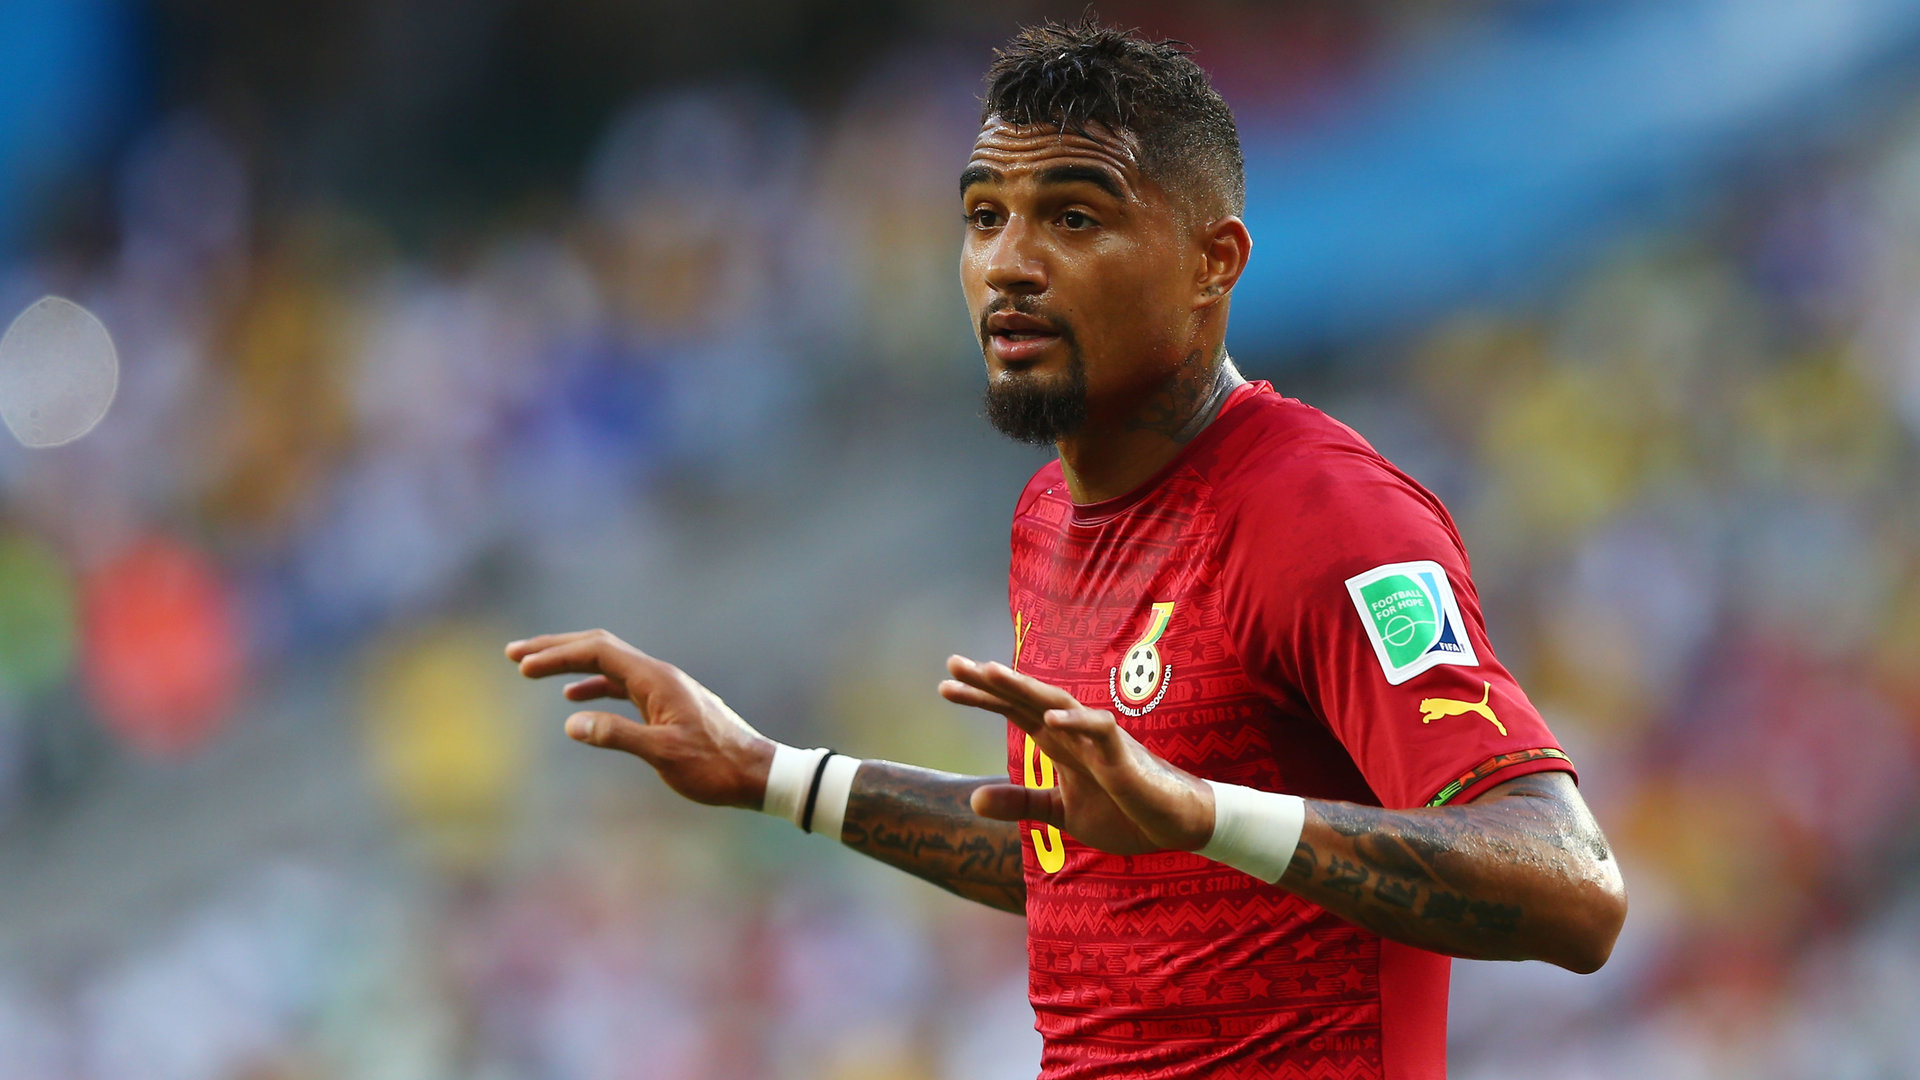 Kevin-Prince Boateng is welcome to join my team - CK Akonnor